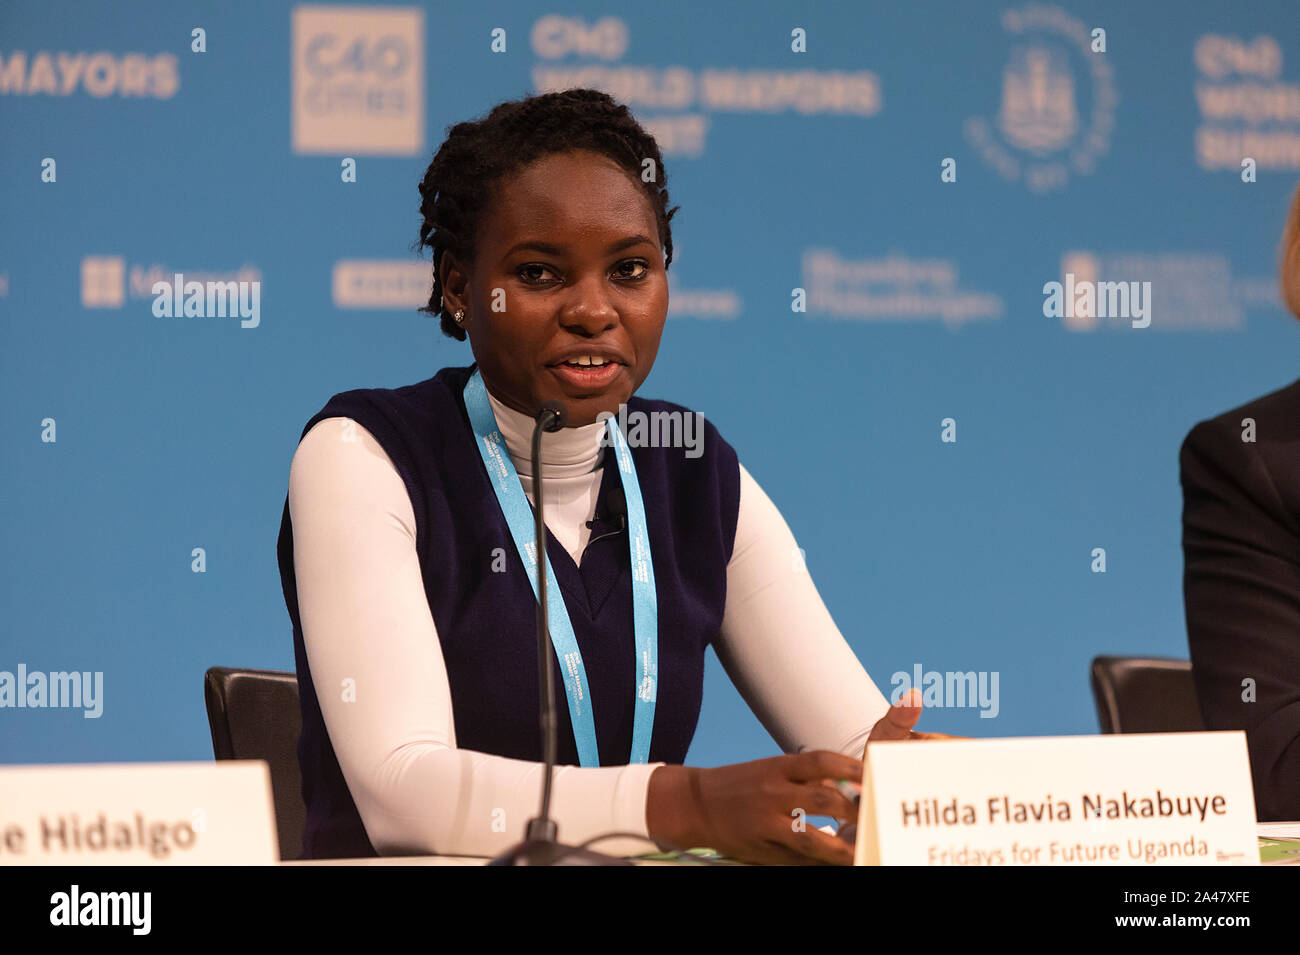 COPENHAGEN, DENMARK – OCTOBER 11, 2019: Hilda Flavia Nakabuye,  climate activists within the ‘Fridays for Future’ movement,  Uganda, during the ‘Mayors and Youth Activist’ press conference at the C40 World Mayors Summit. The young activist from Uganda gave a powerful and emotional speech. During the press conference young activist explained what they expect of the grown-up politicians. More than 90 mayors of some of the world’s largest and most influential cities representing some 700 million people meet in Copenhagen from October 9-12 for the C40 World Mayors Summit. The purpose with the summ Stock Photo